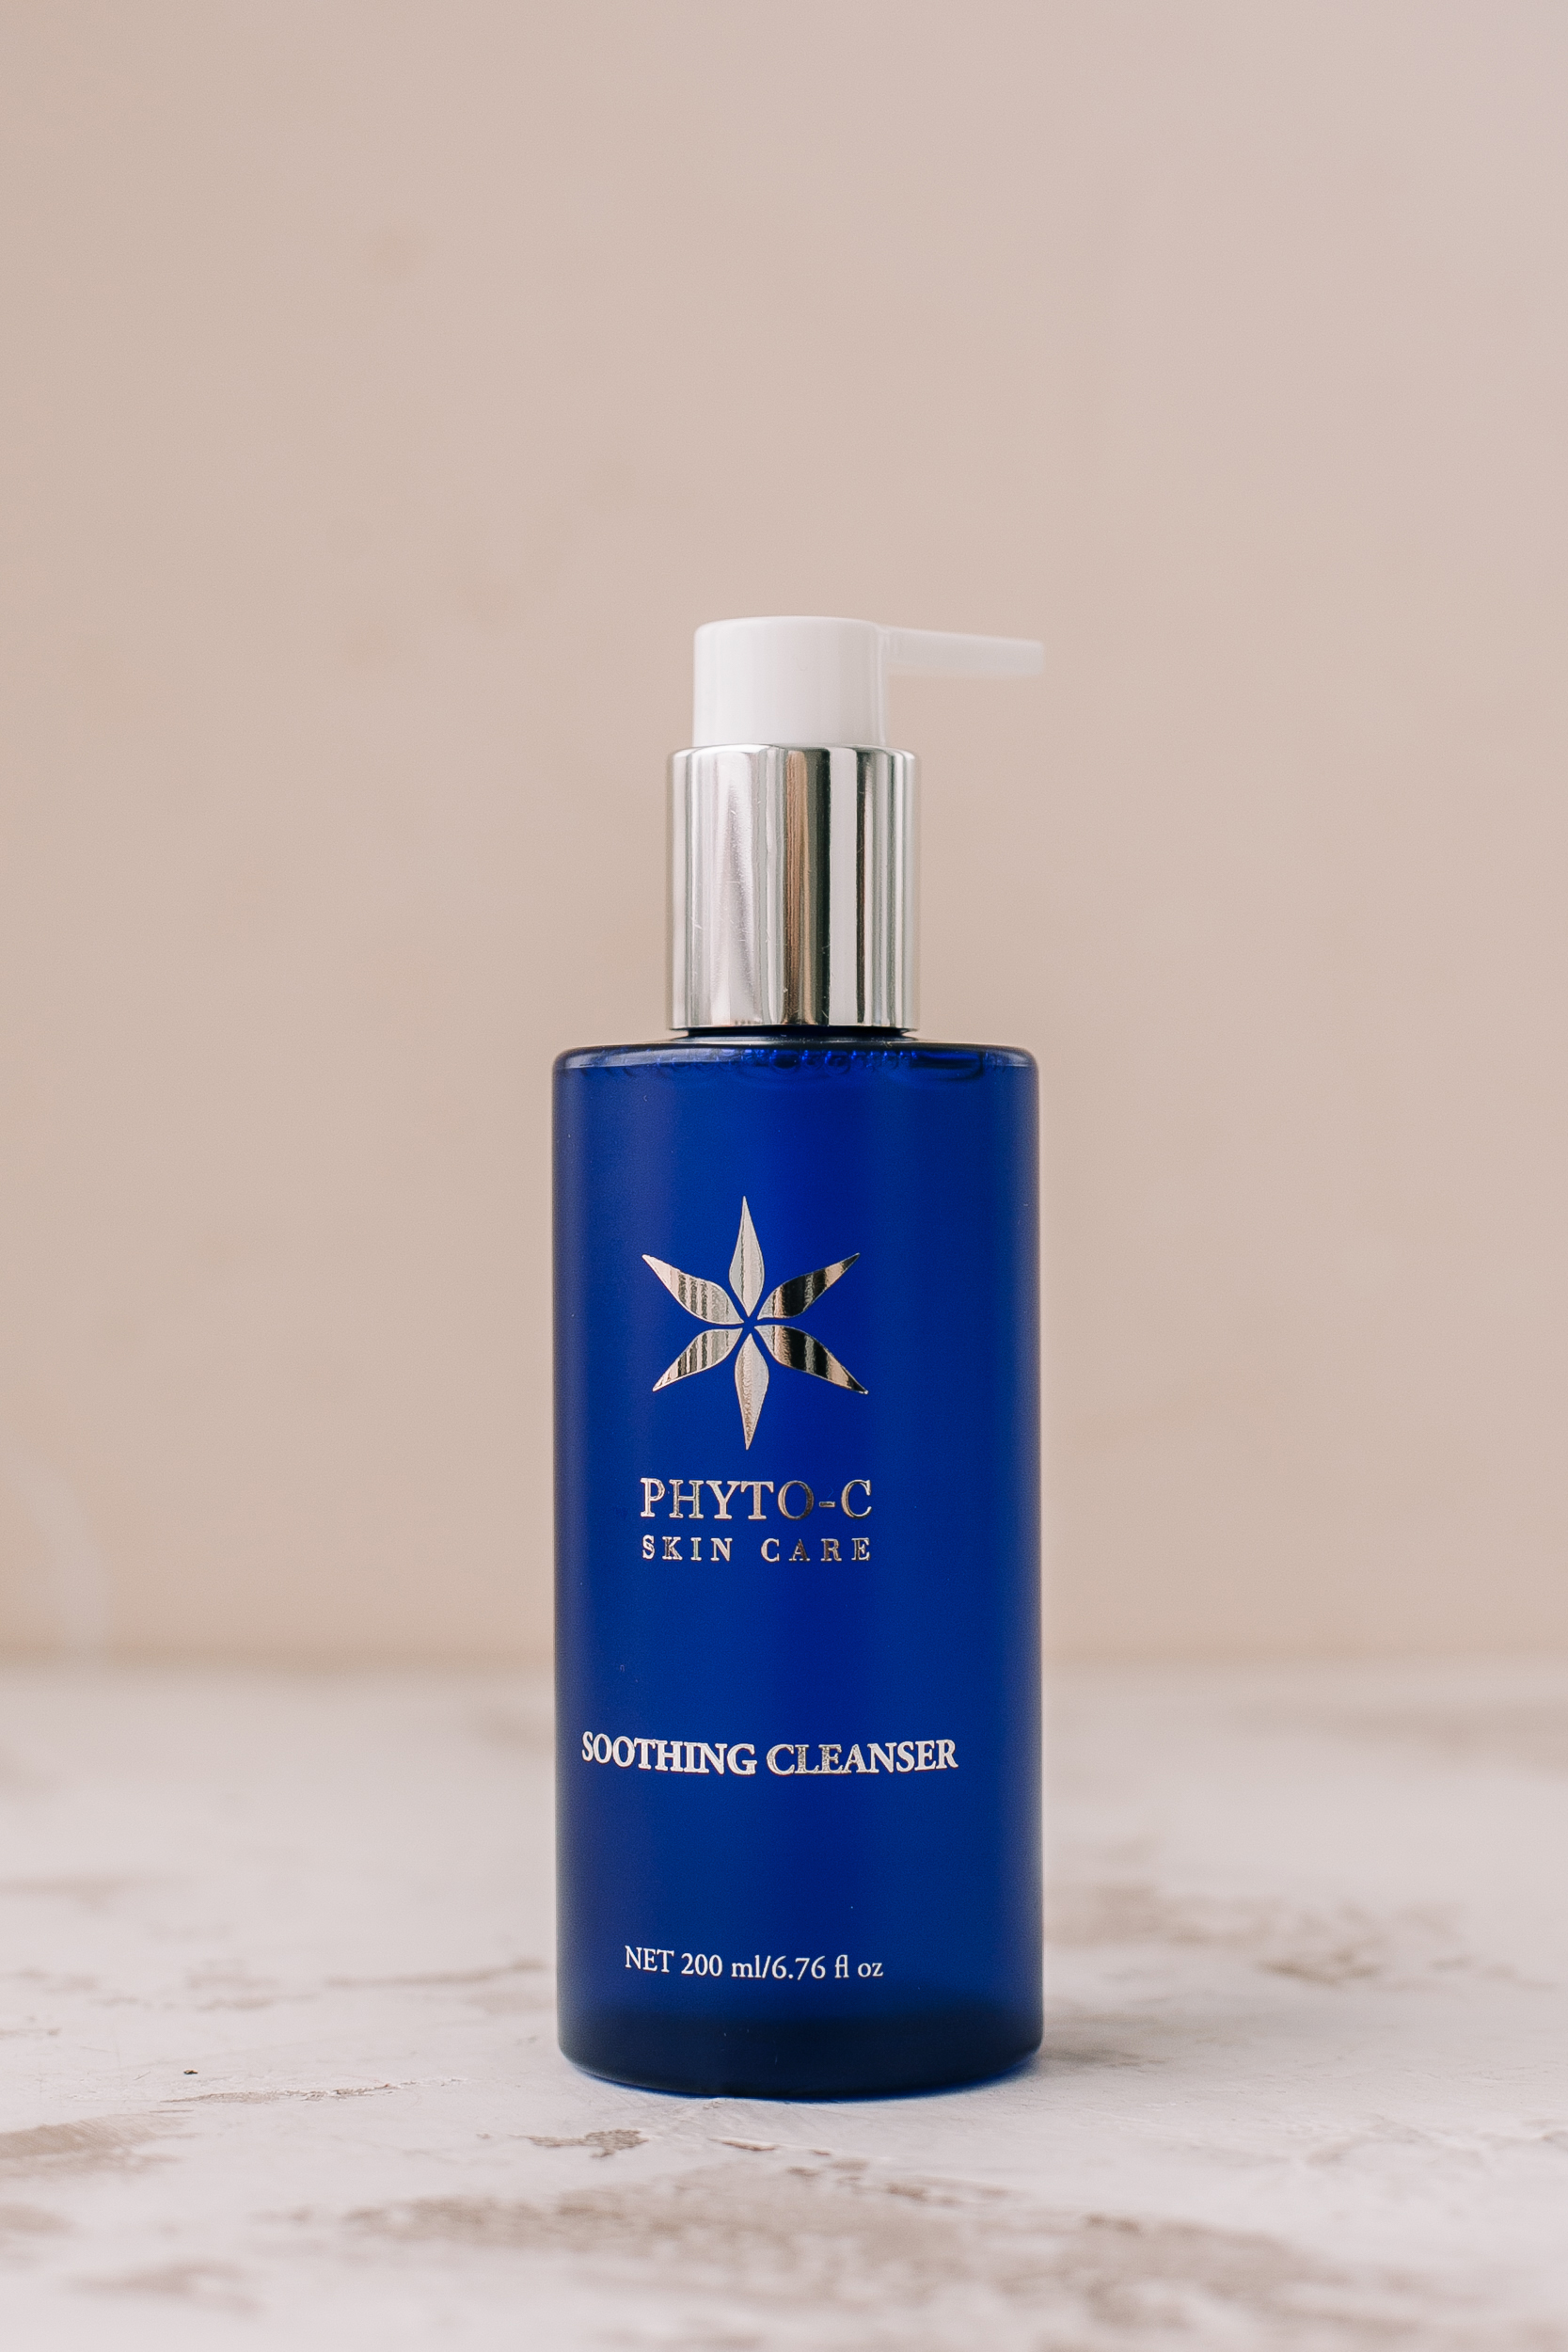 Soothing cleanser. Phyto-c Soothing Cleanser. Фито си. Yesnow Cleanser.